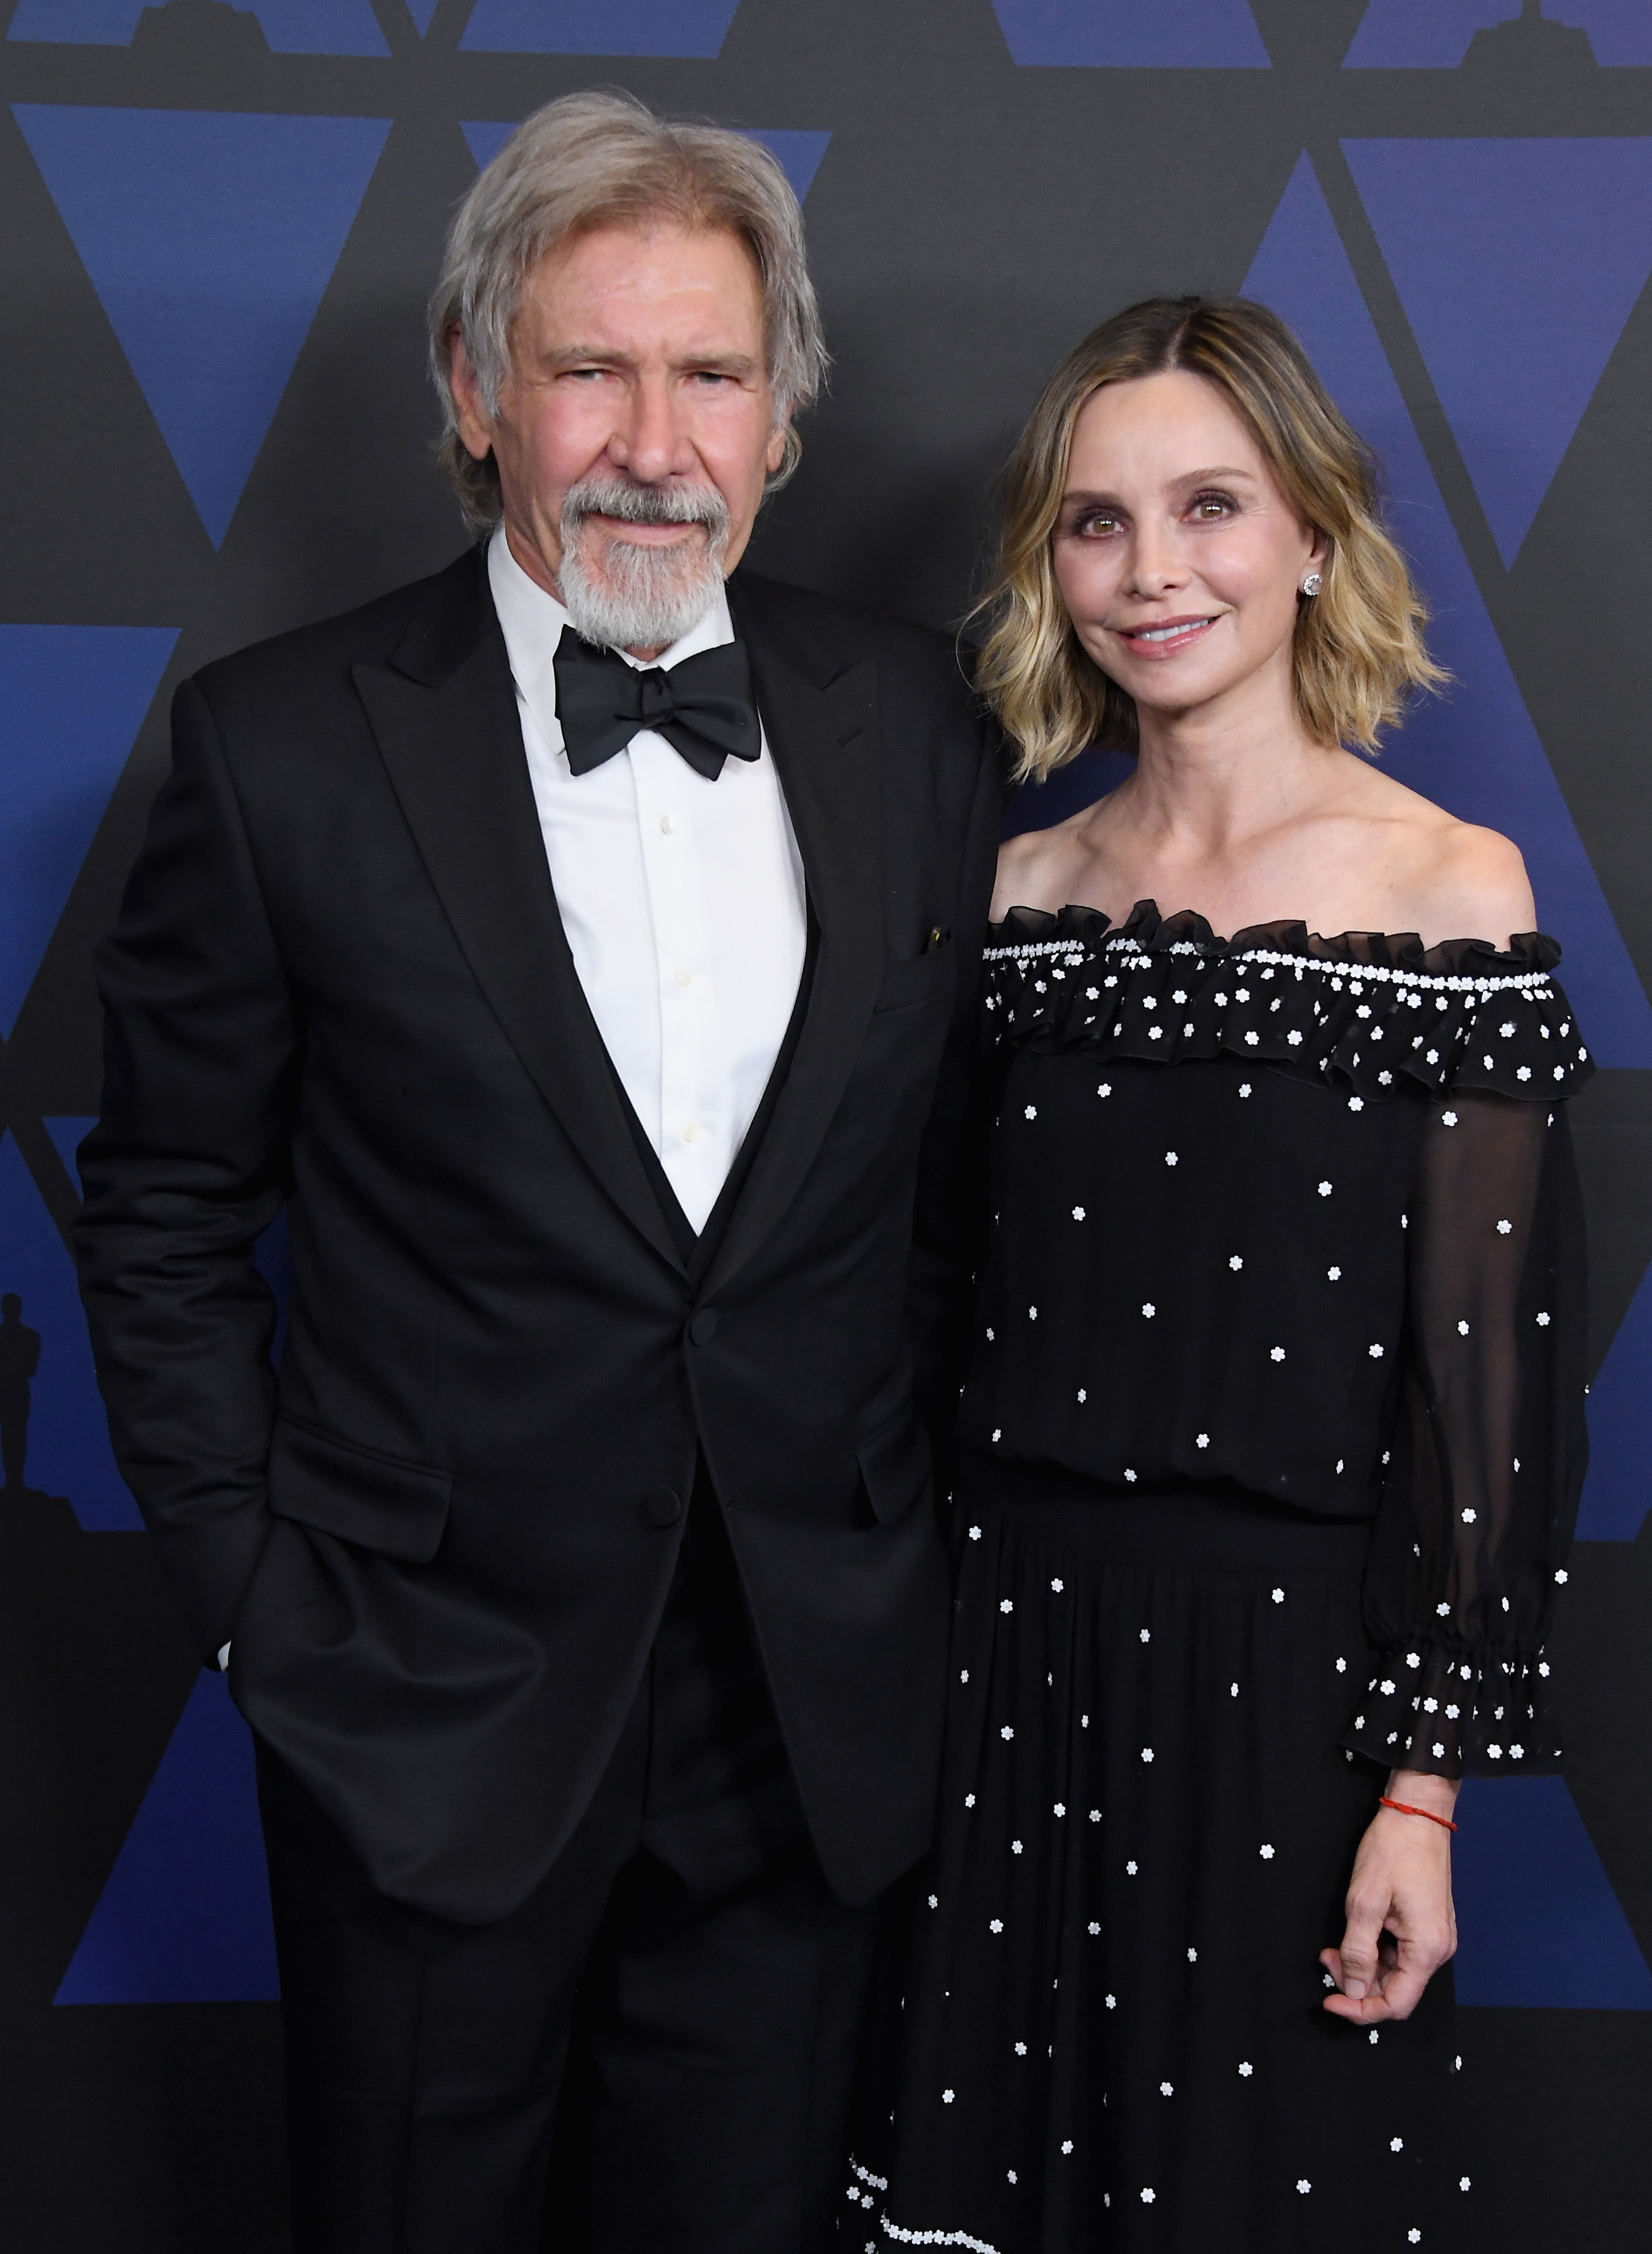 Harrison Ford und Calista Flockhart bei den Academy of Motion Picture Arts and Sciences 10th Annual Governors Awards am 18. November 2018 in Hollywood, Kalifornien. | Quelle: © Getty Images